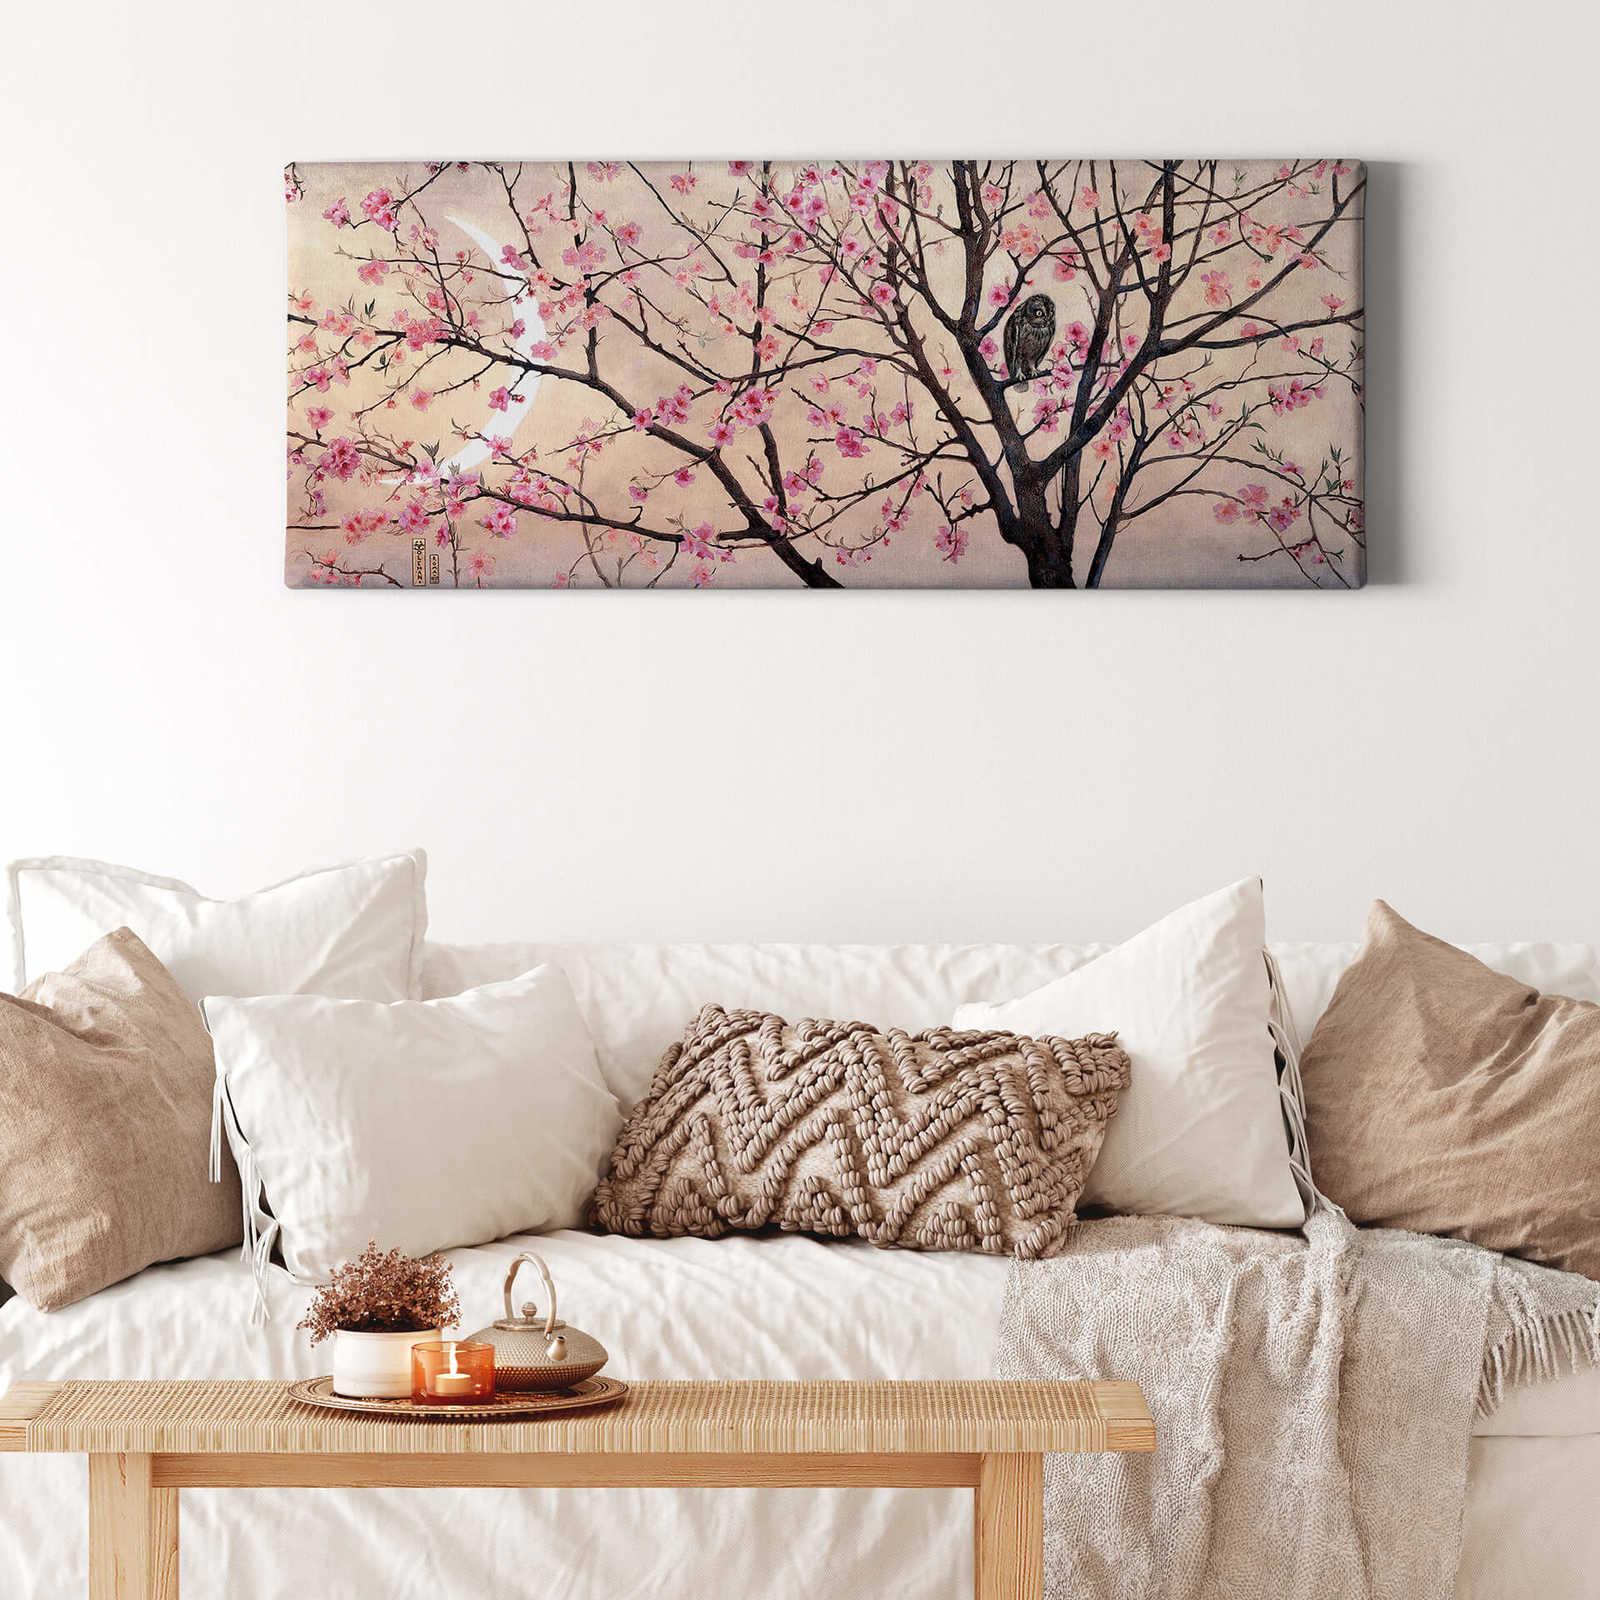             Canvas picture of cherry blossom tree with owl
        